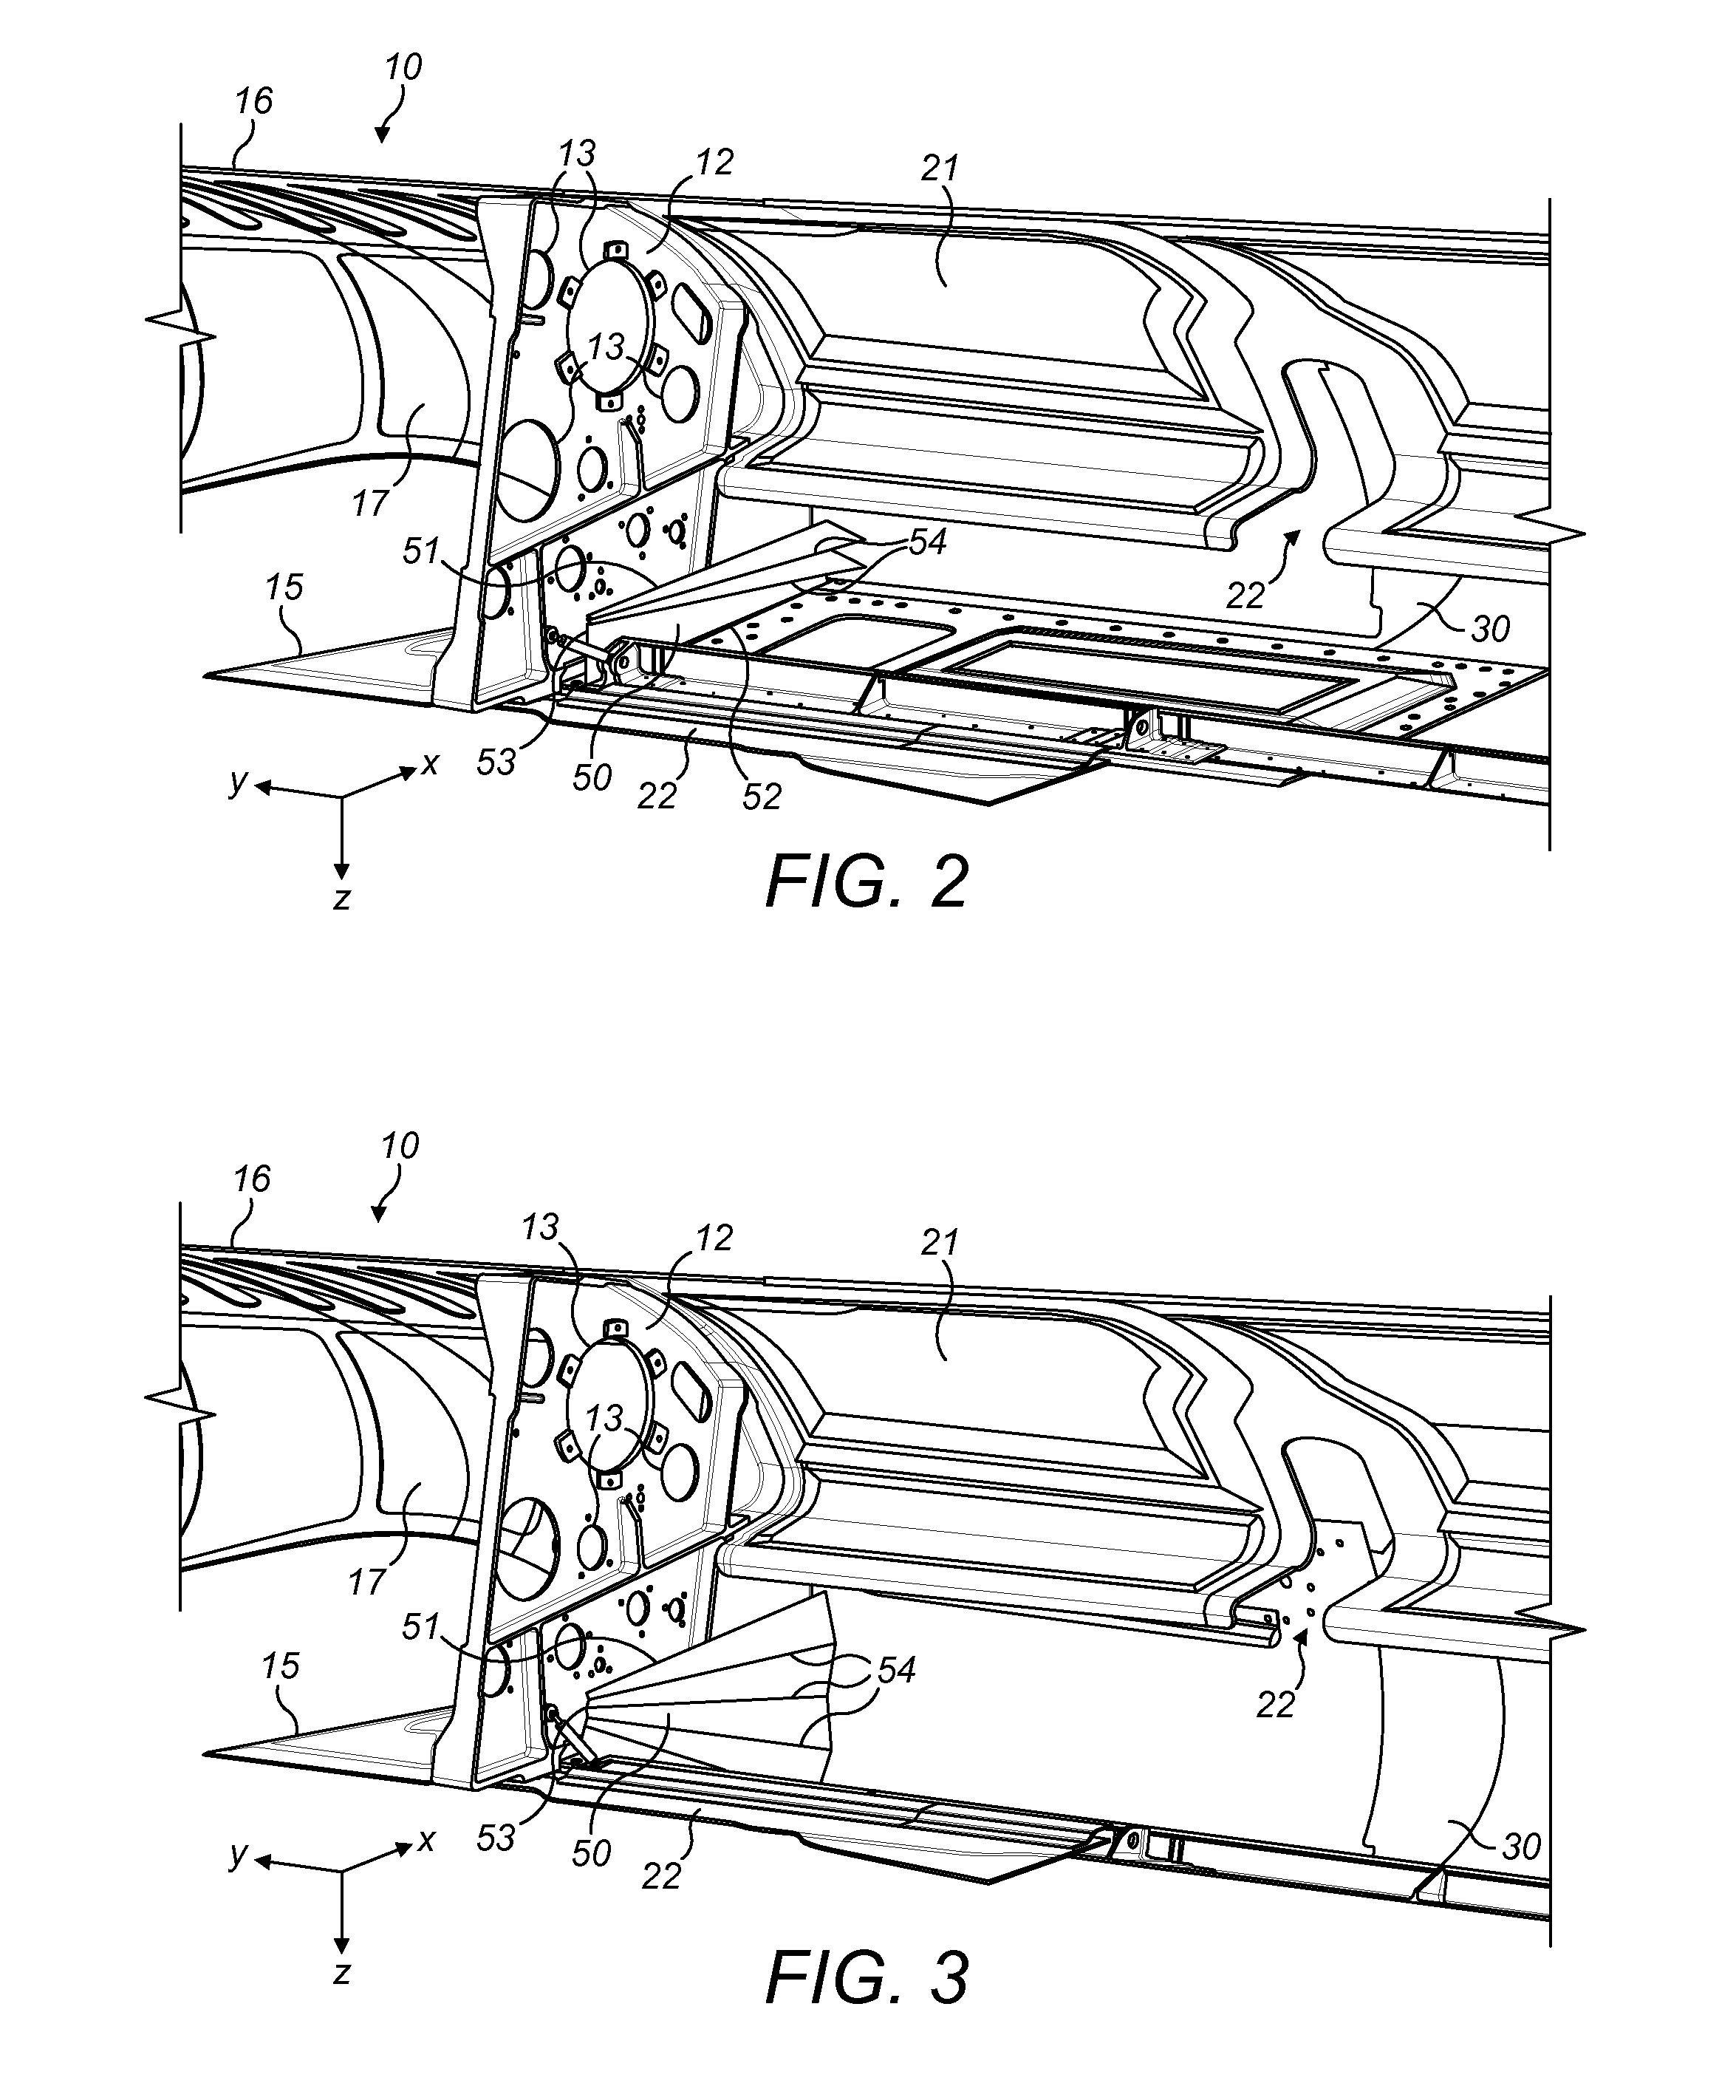 Retractable infill panel for high-lift device